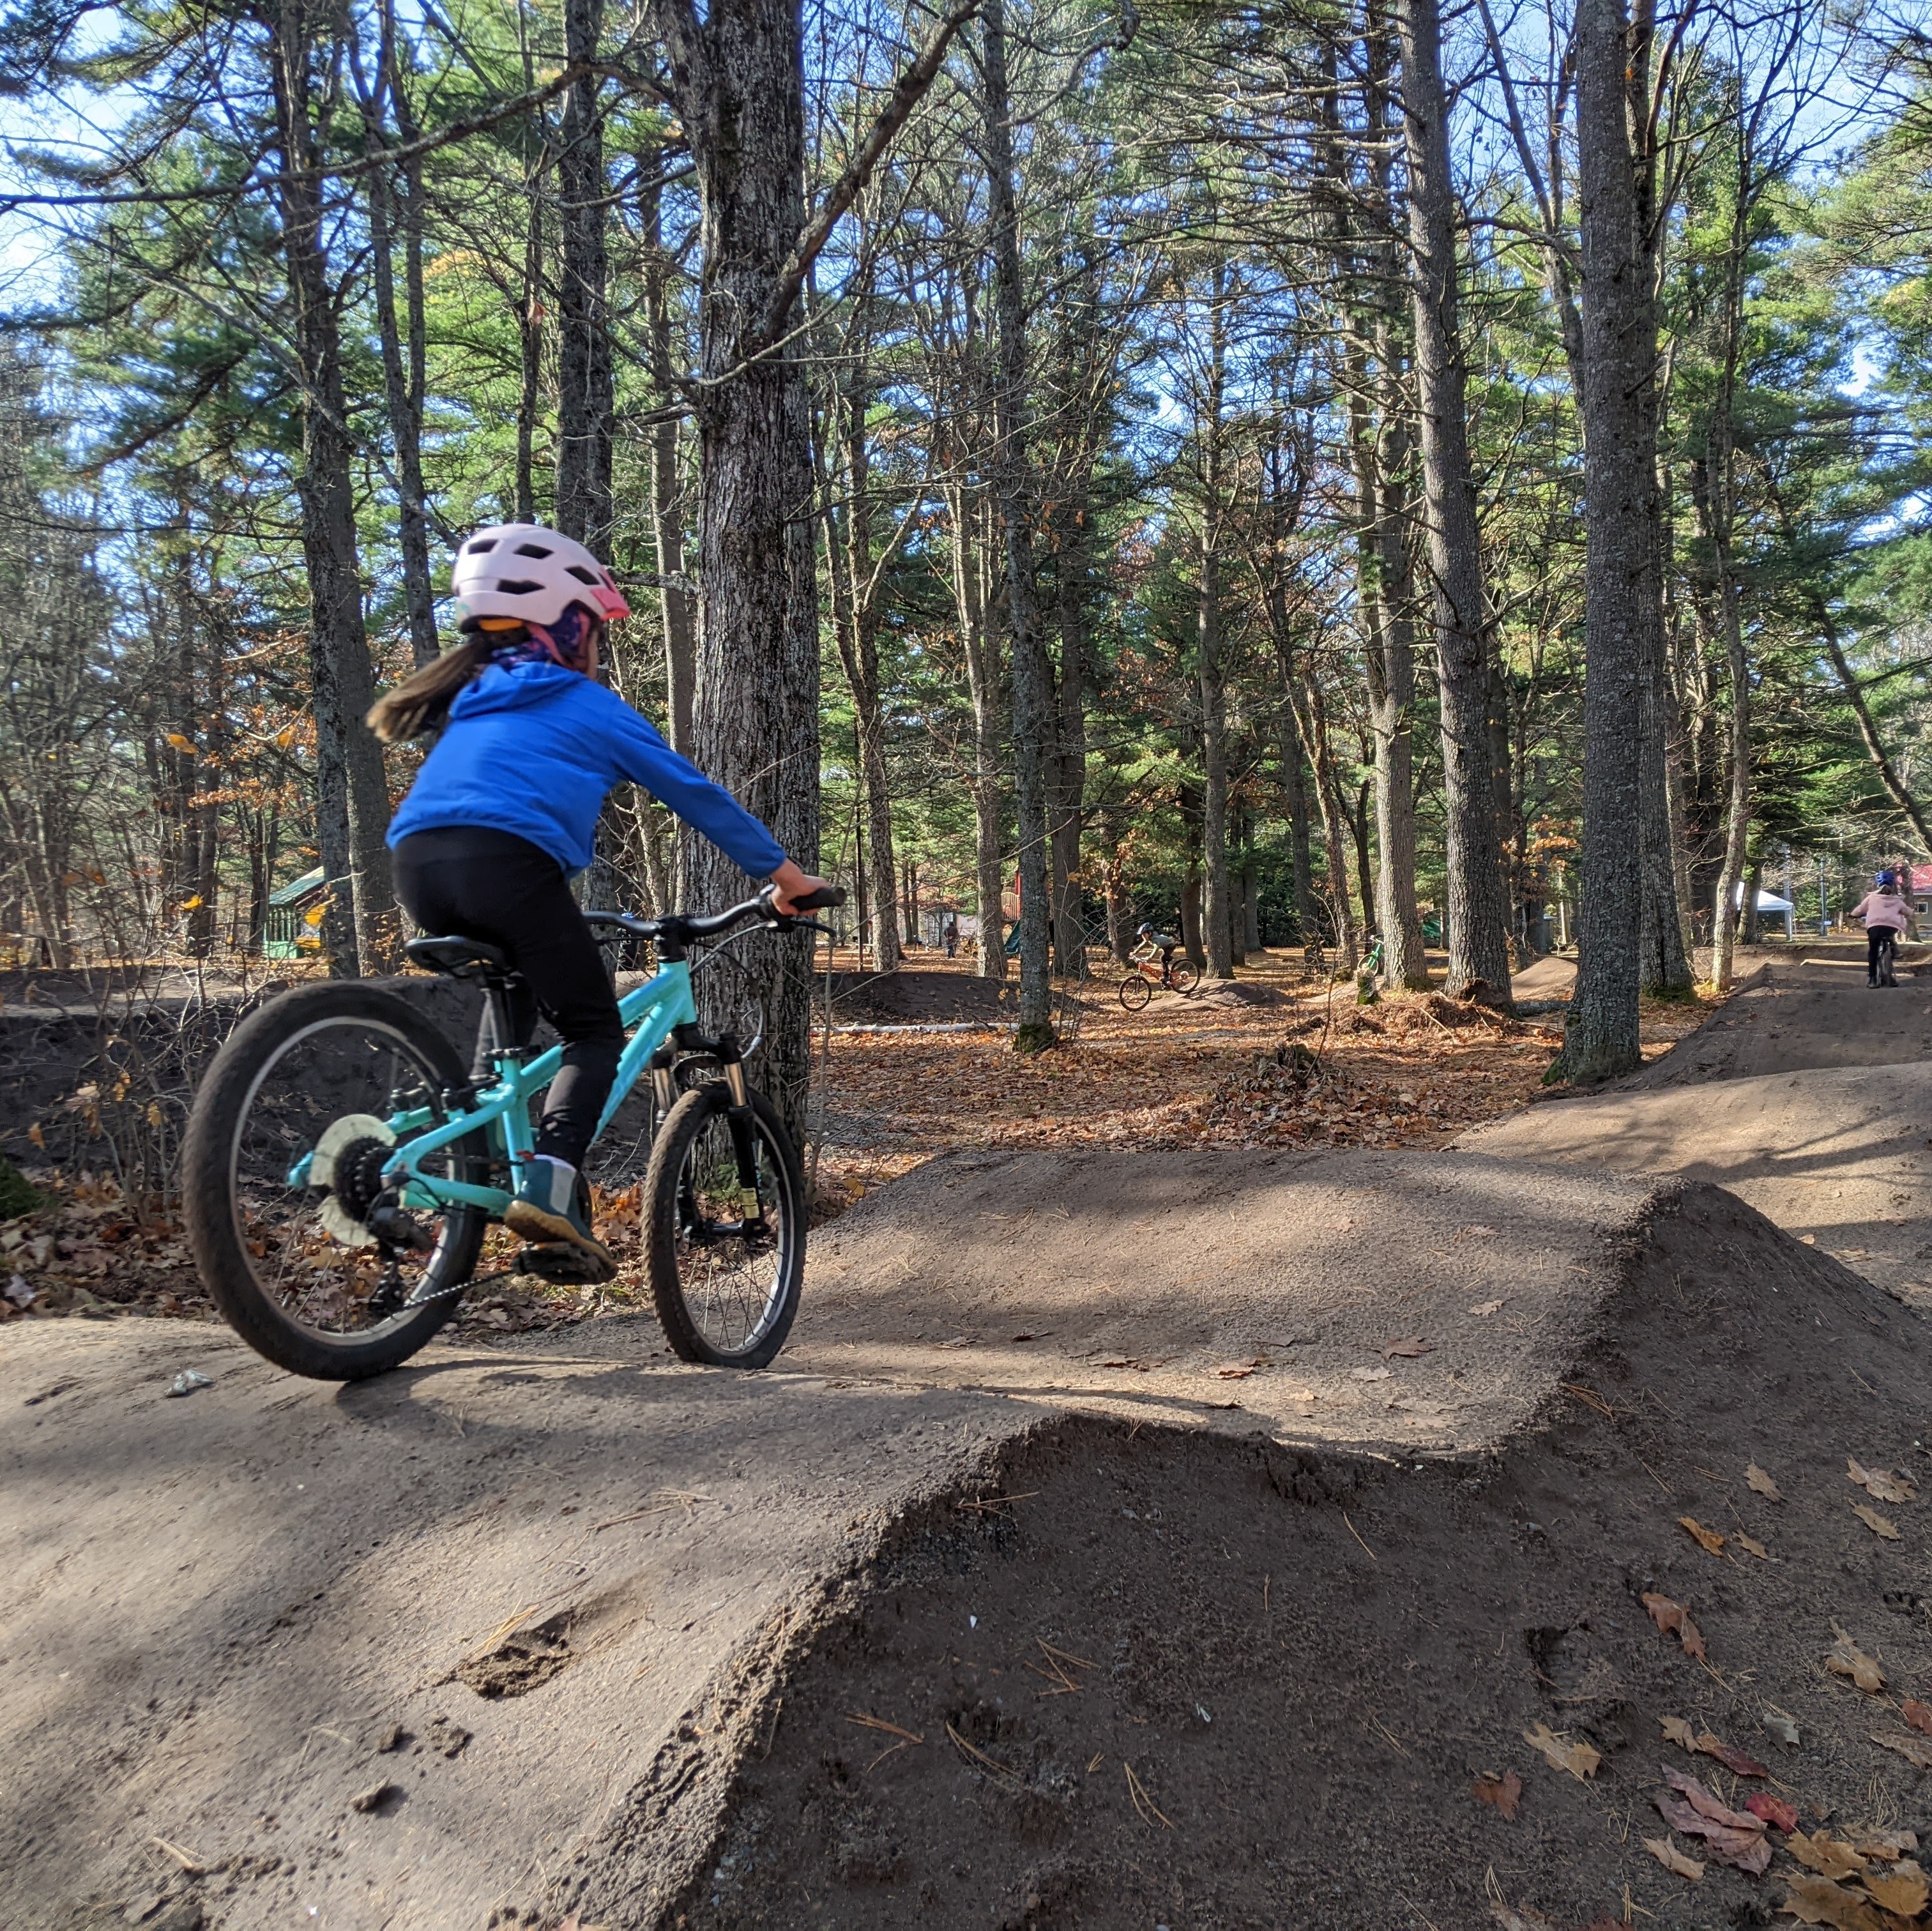 young girl rides a bicycle over a series of dirt ramps along a forest path